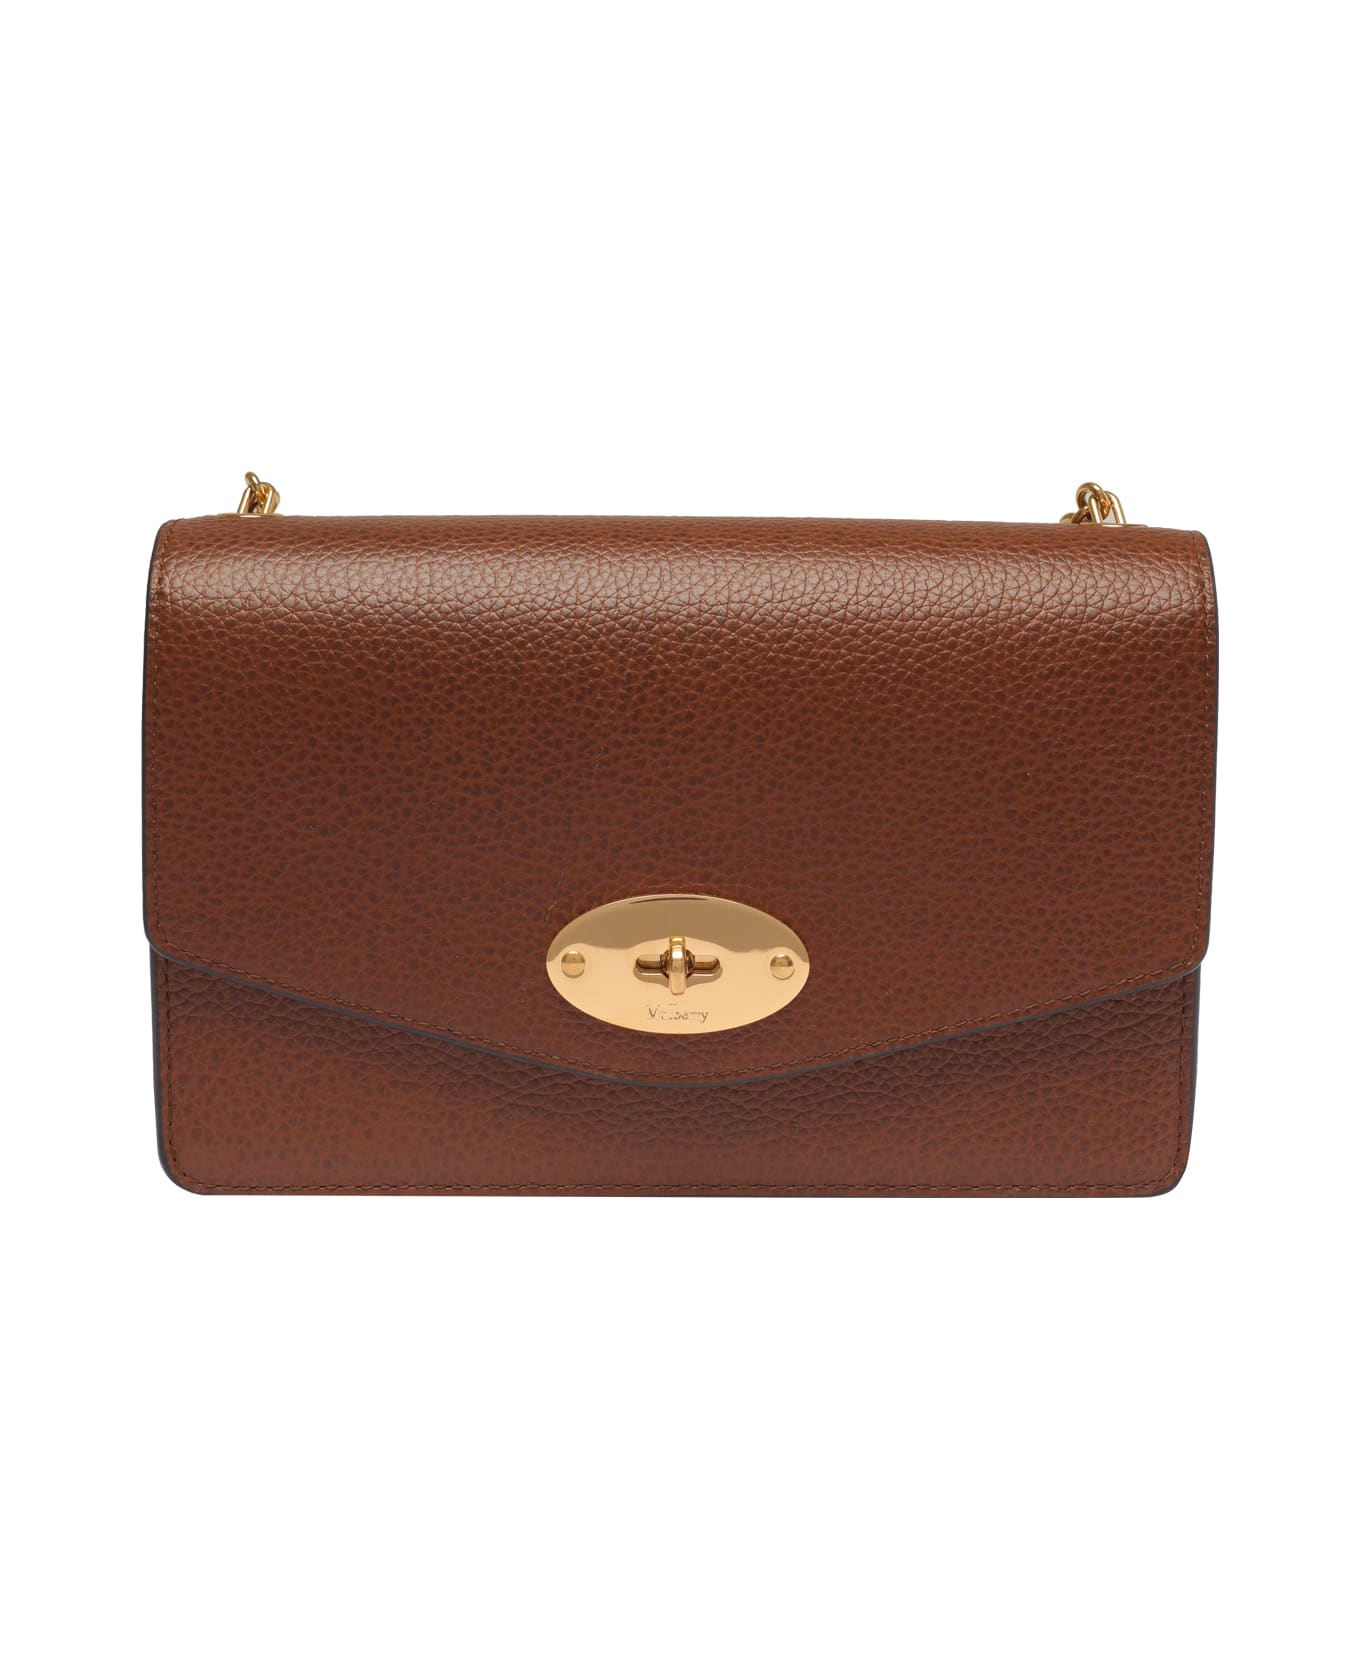 Mulberry Darley Two Tone Shoulder Bag - Brown